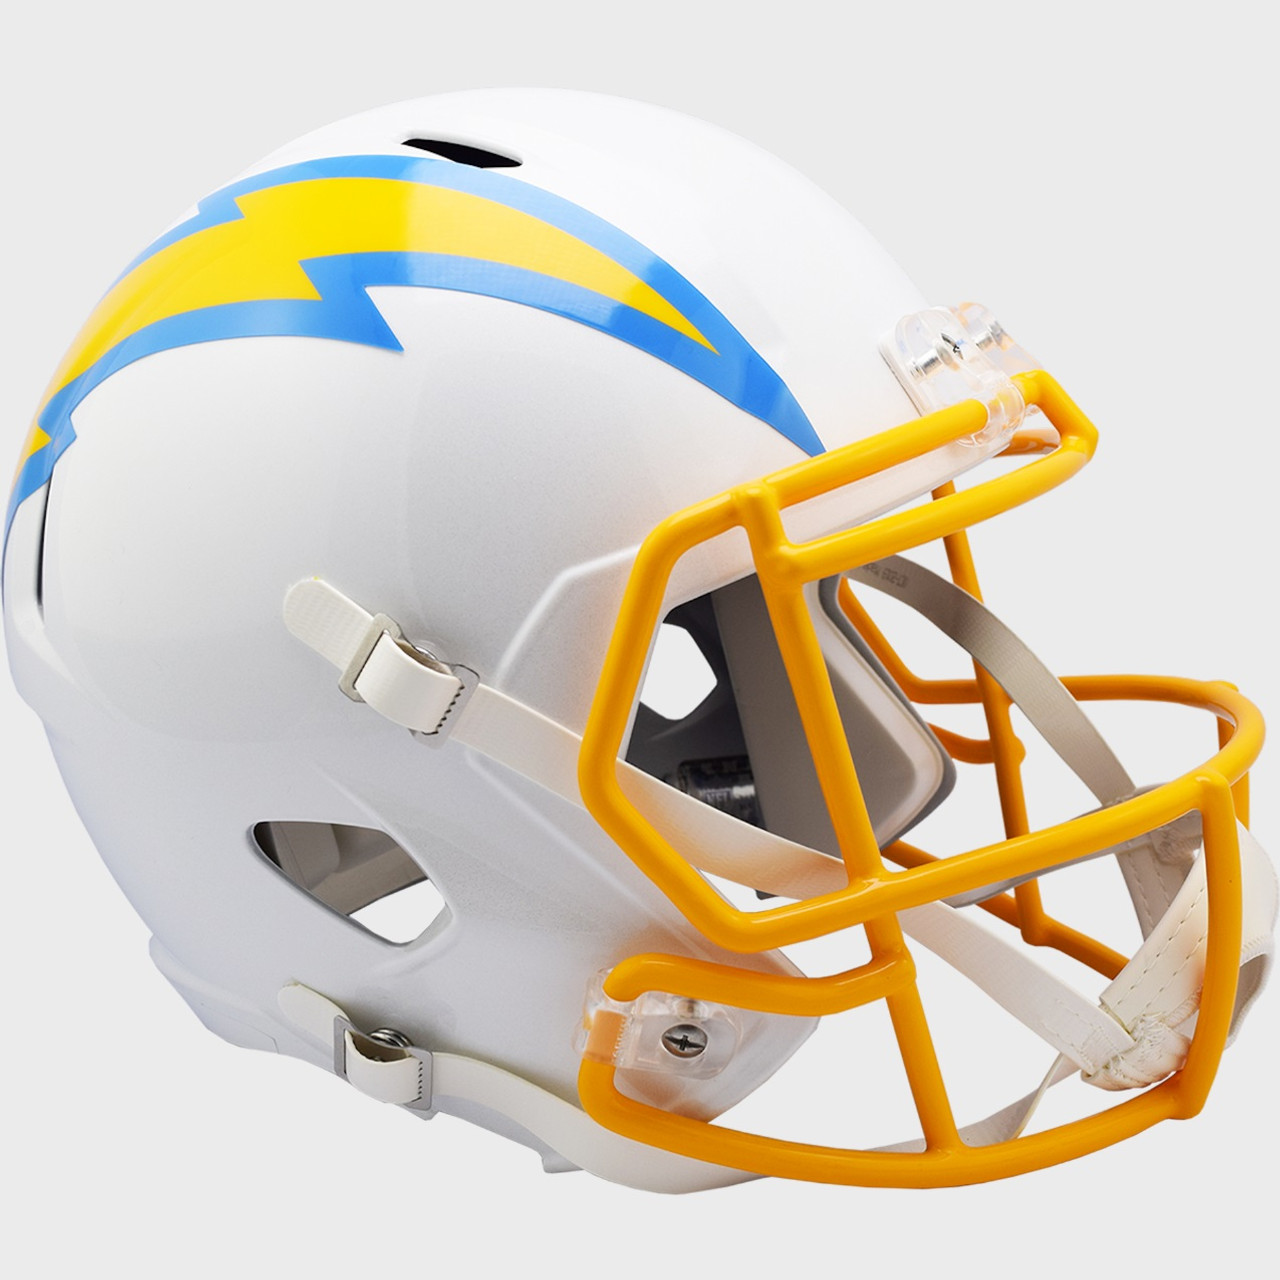 Los Angeles Chargers New 2020 SPEED Riddell Full Size Replica Football  Helmet